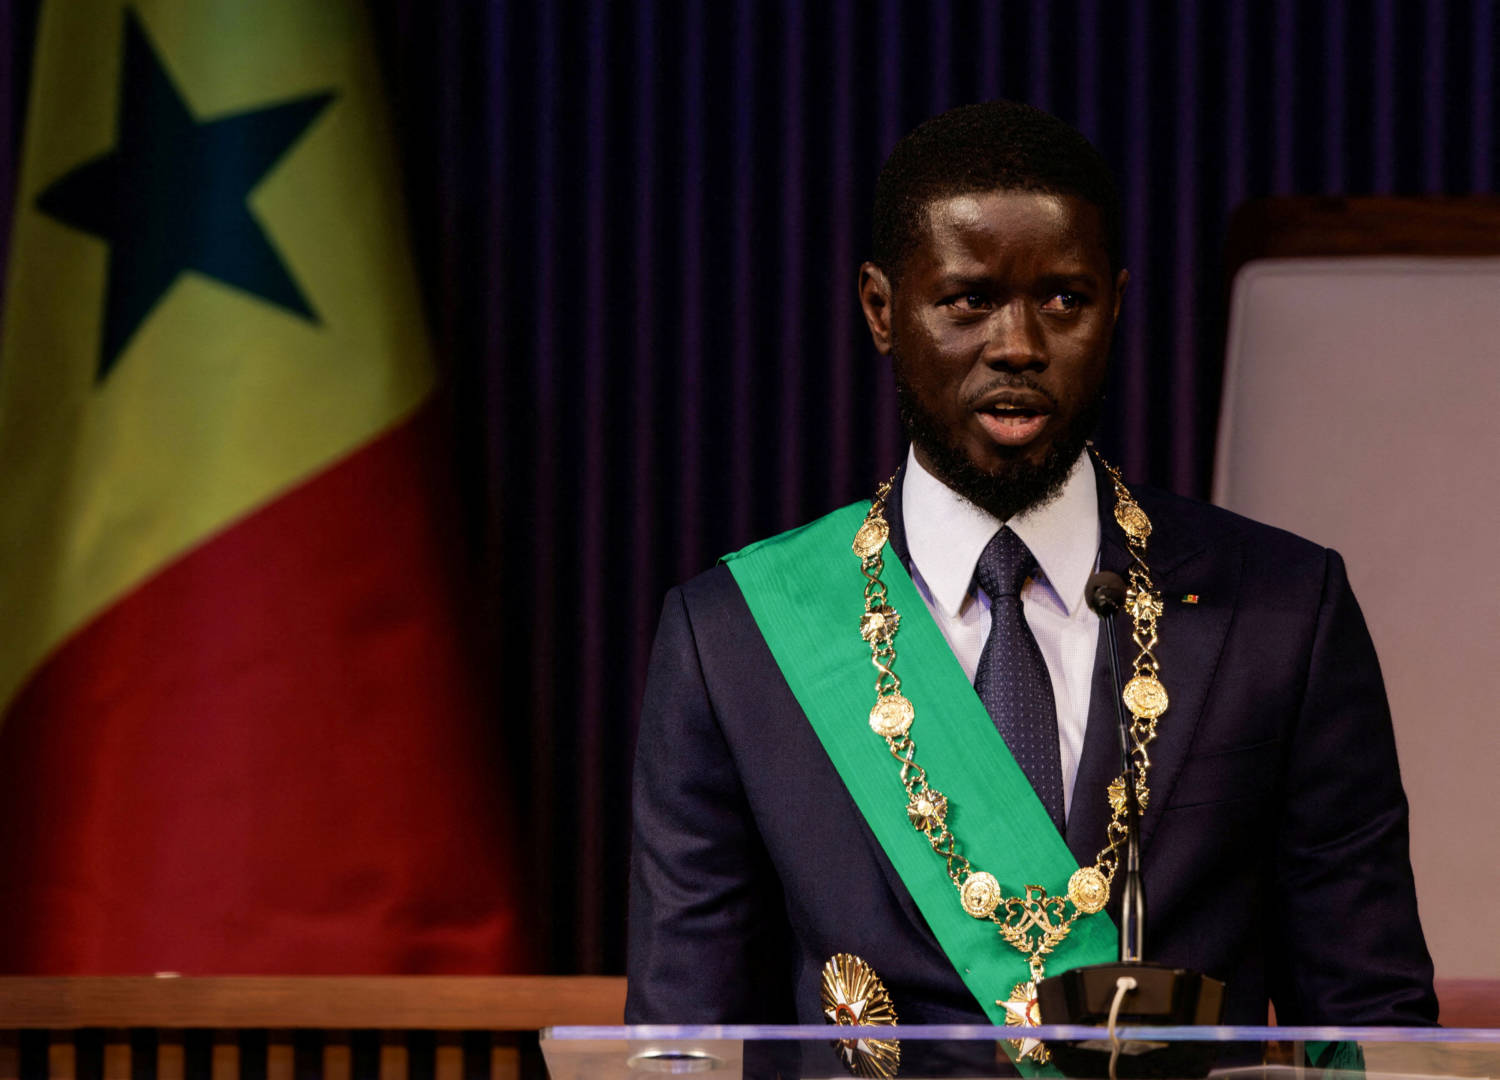 File Photo: Senegal's Newly Elected President Bassirou Diomaye Faye Takes The Oath Of Office As President During The Inauguration Ceremony In Dakar